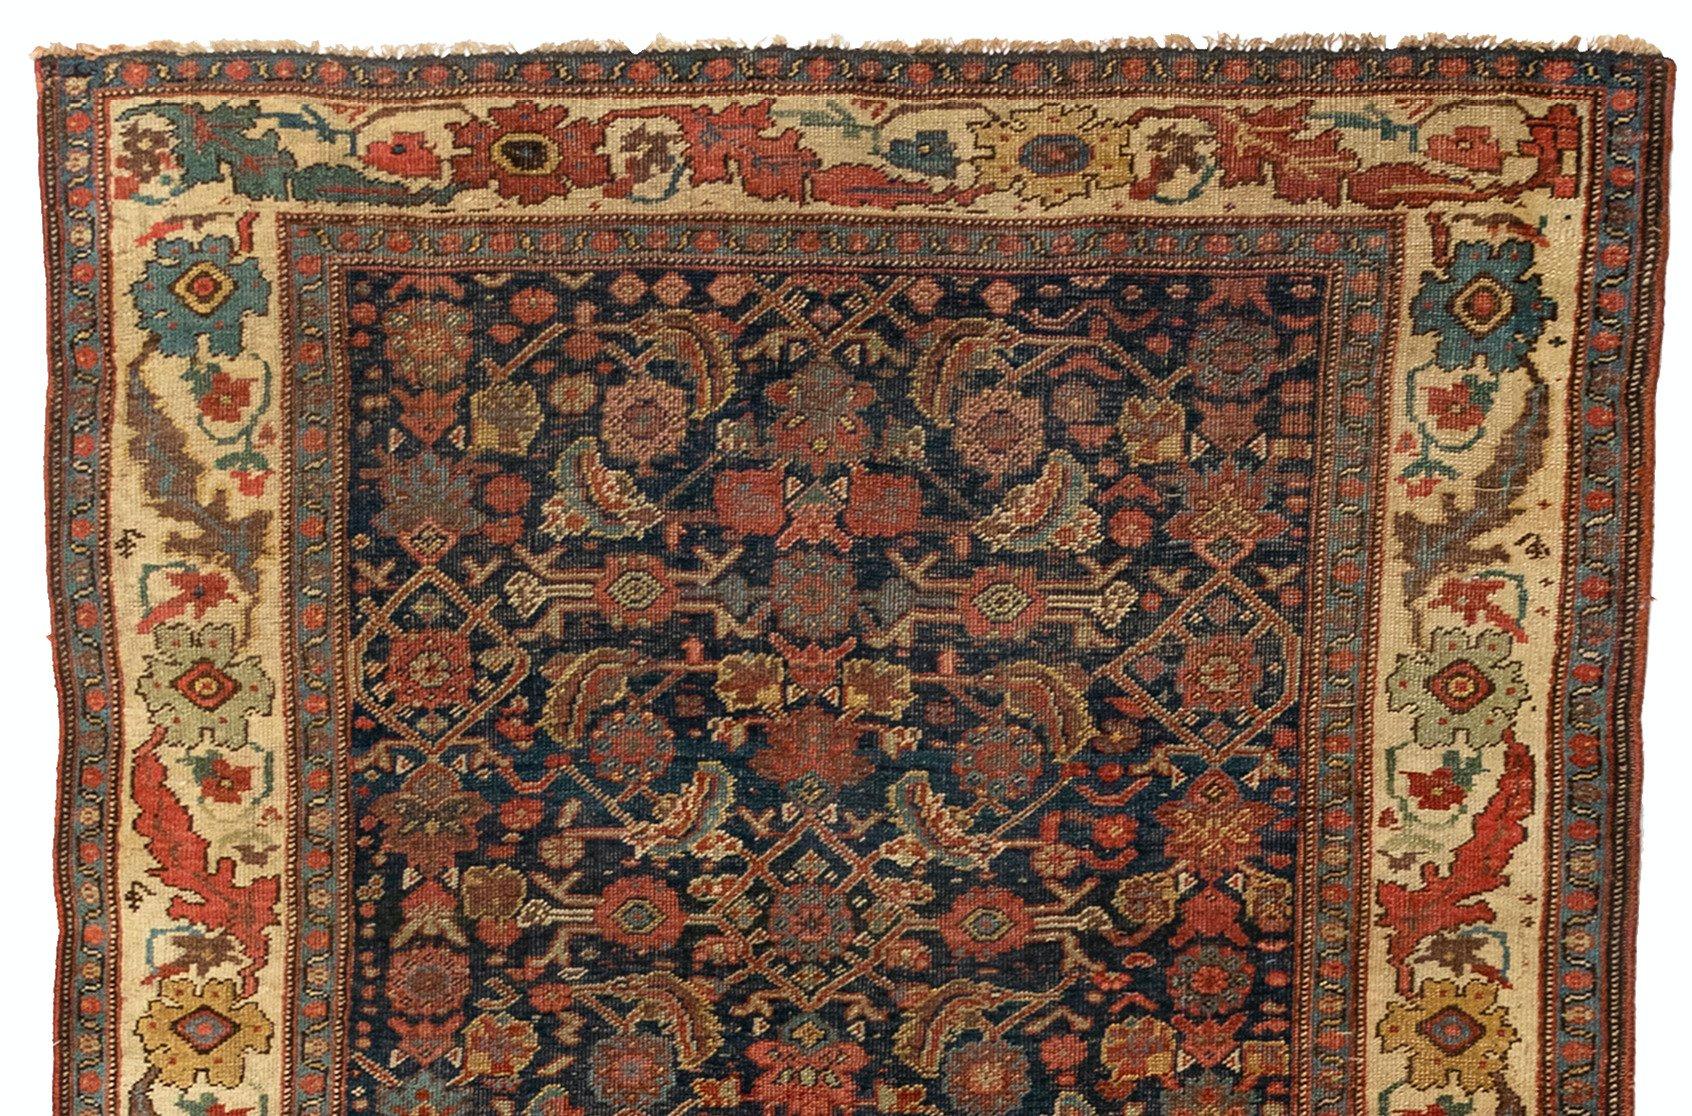 This is a lovely antique navy blue and ivory Persian Bijar rug hand knotted in Iran in the 1900s and measures: 4.6 x 12.2 ft.

Bijar rugs are mainly woven in the town of Bijar and its surrounding villages. Bijar is located in the province of